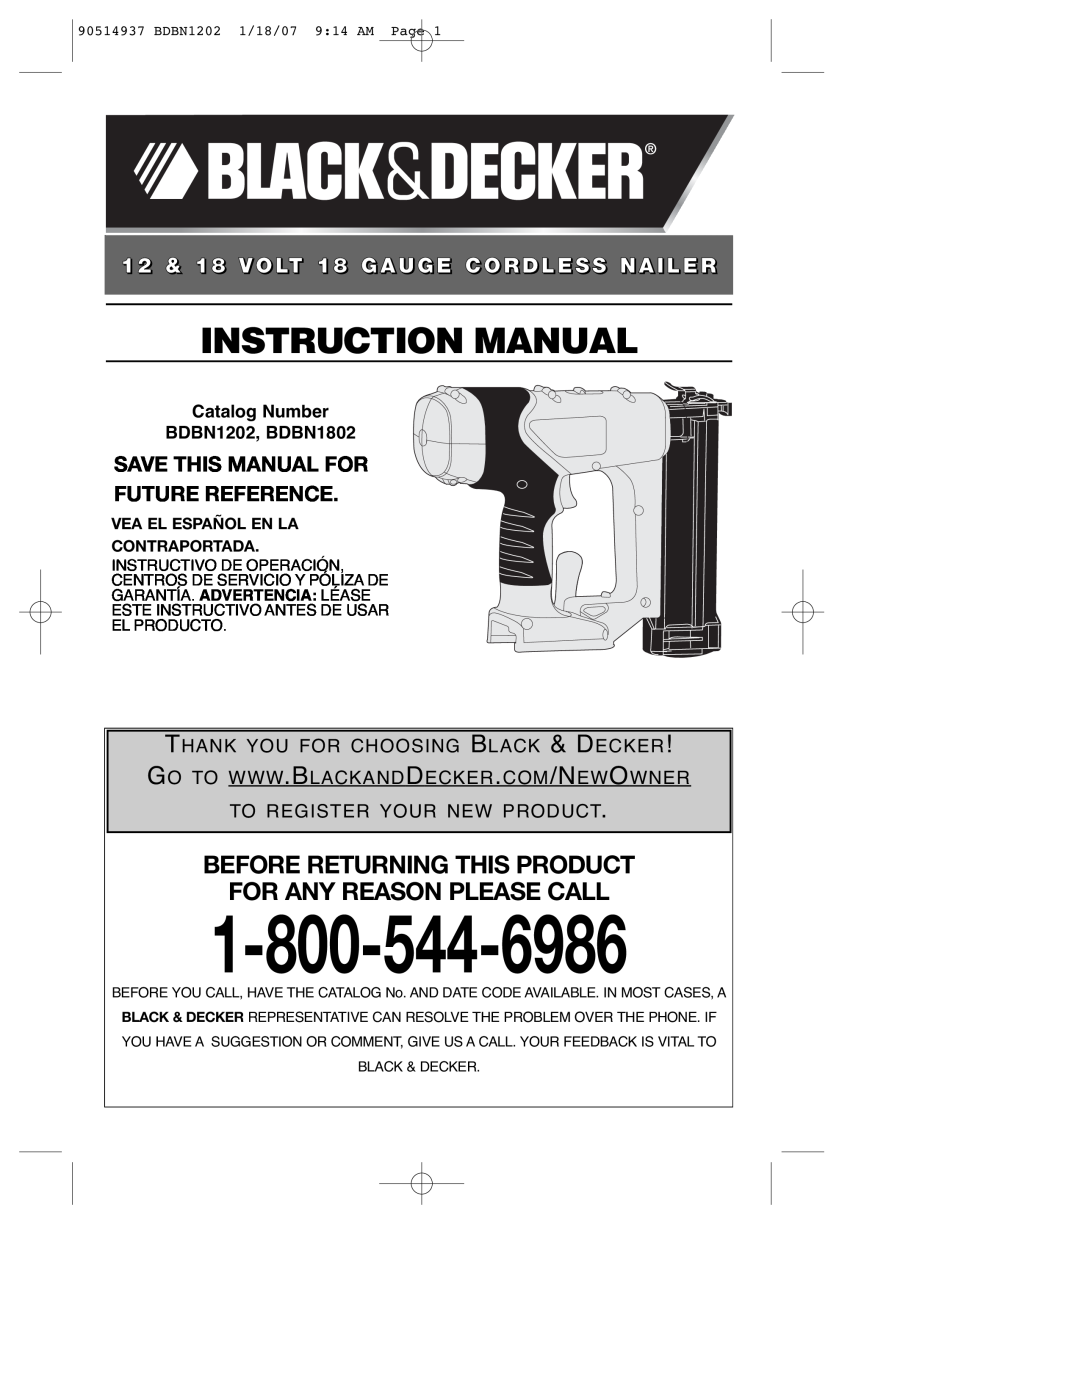 Black & Decker BDBN1802 instruction manual Before Returning This Product For Any Reason Please Call, Instruction Manual 